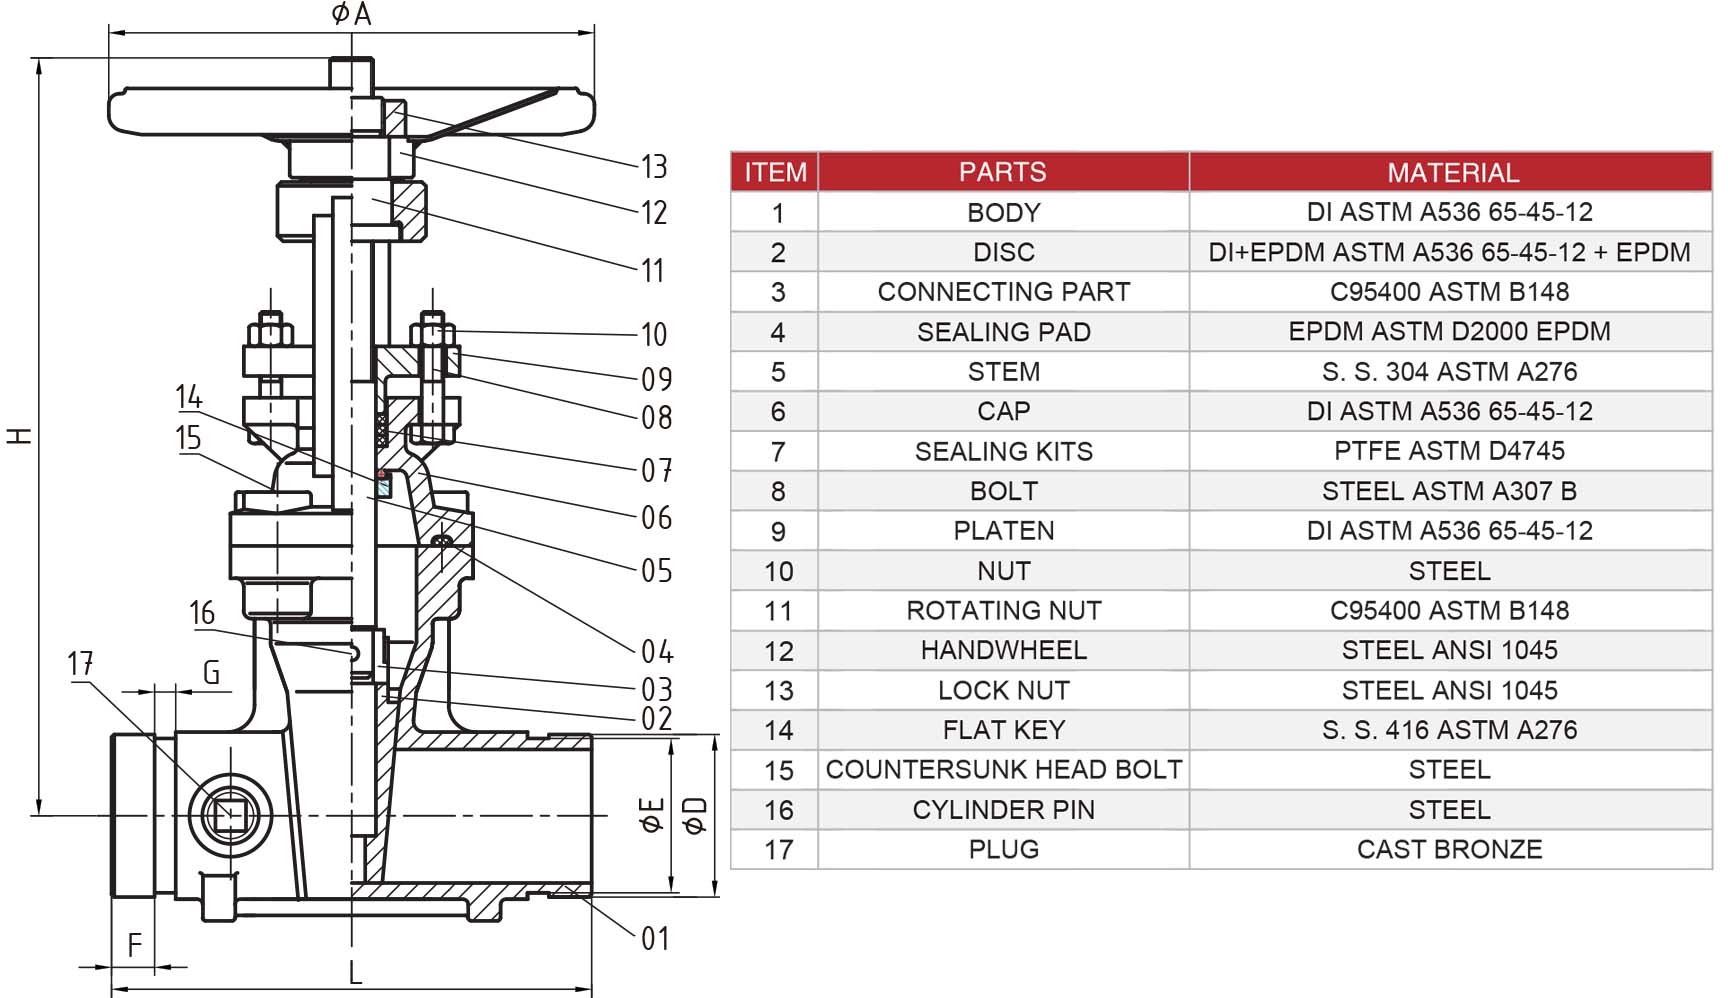 Hants UL Groove OS&Y Gate Valve Structure Diagram